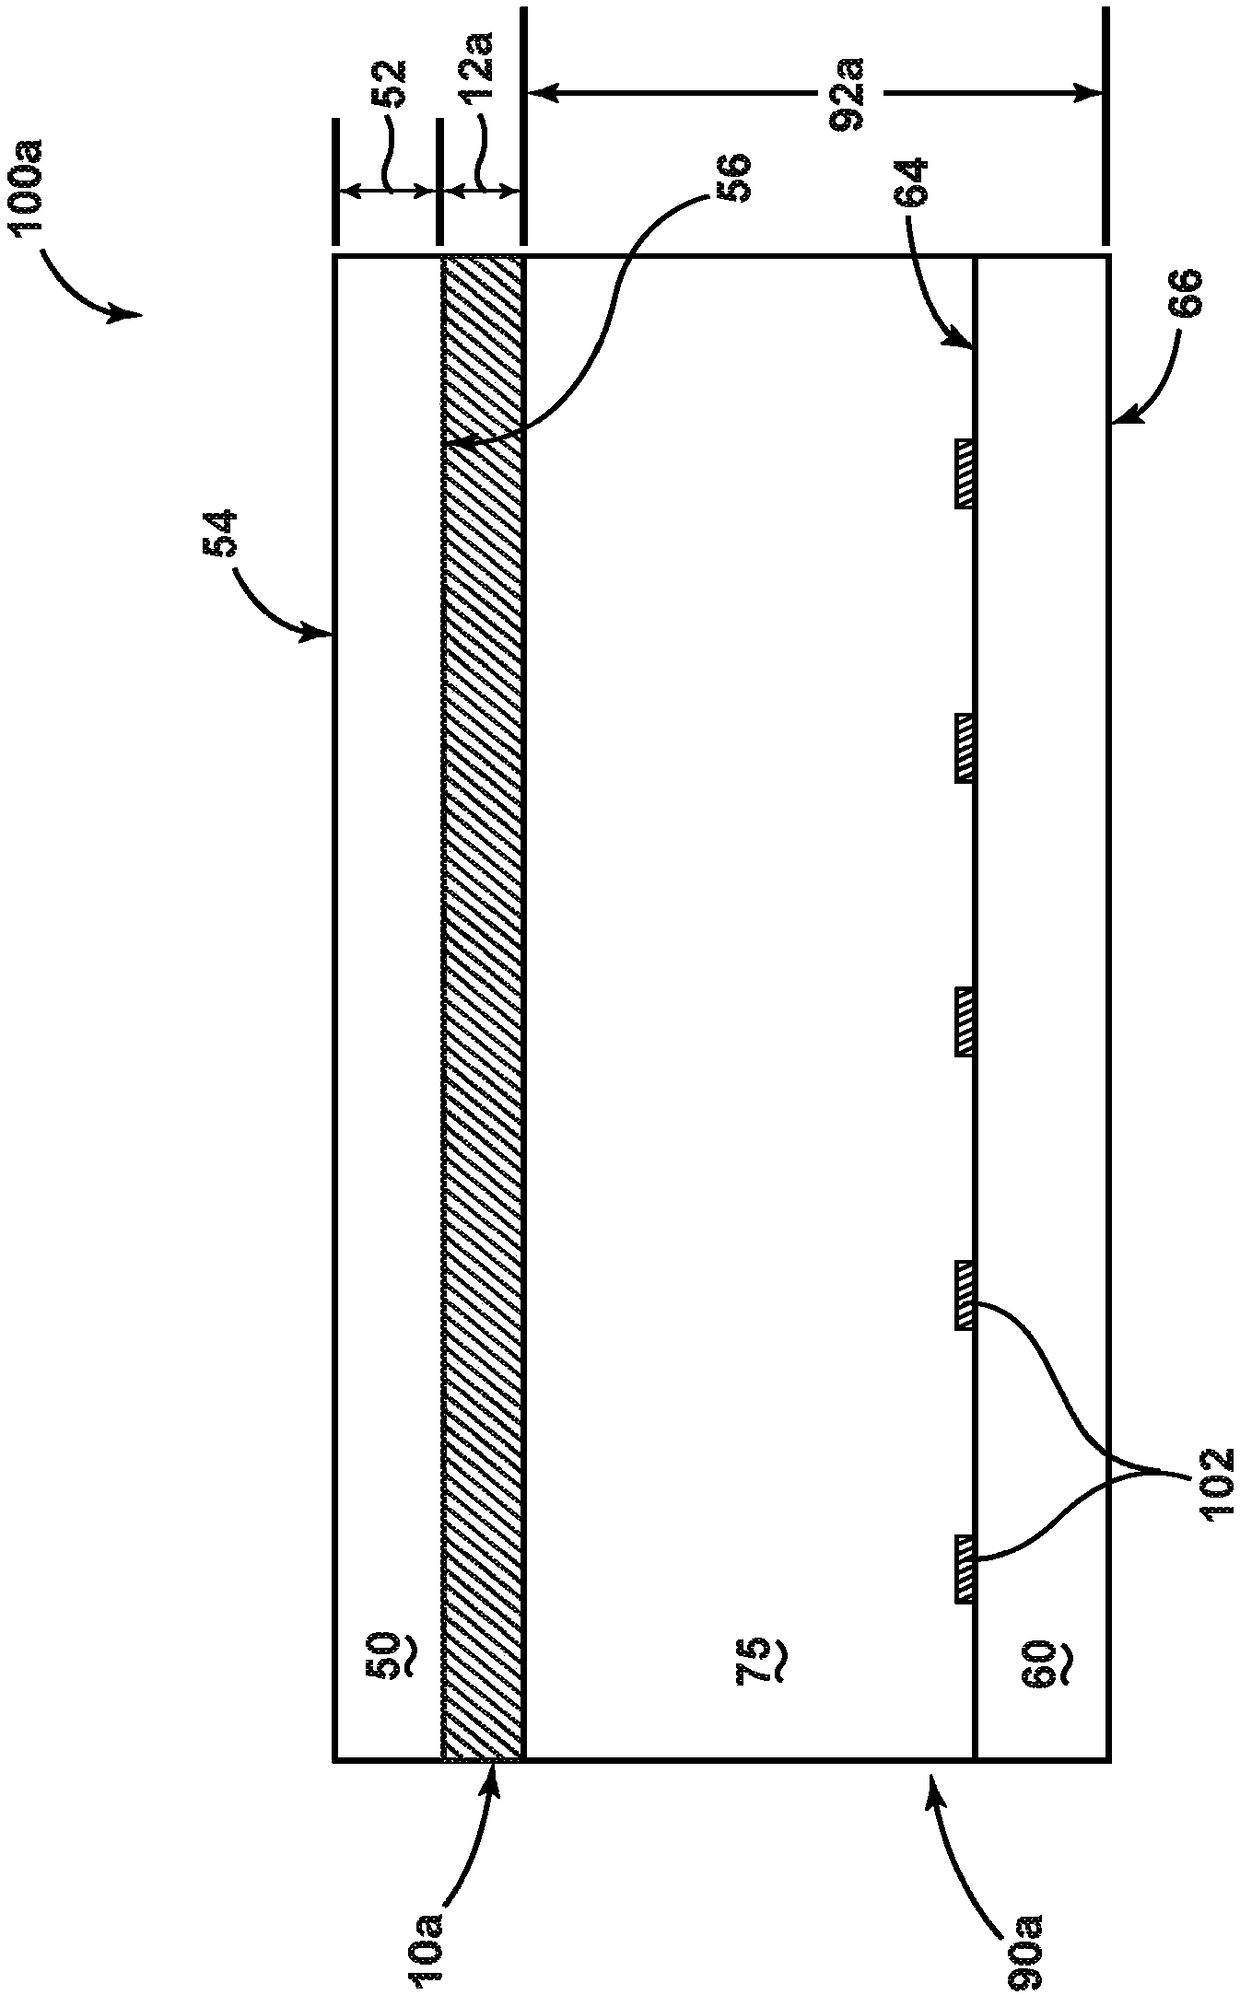 Bendable electronic device modules, articles and methods of making the same